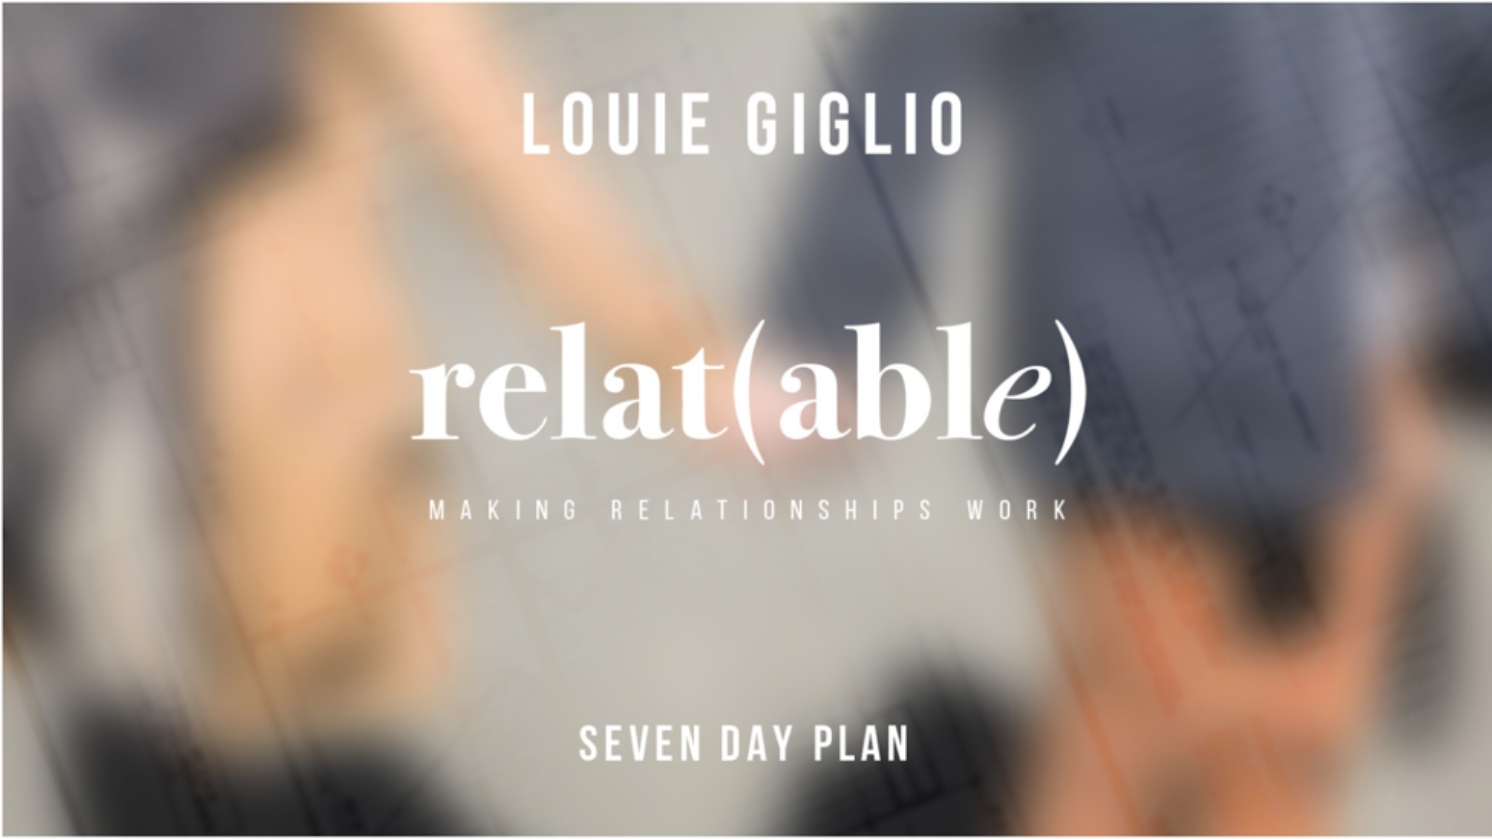 Relat(able): Making Relationships Work